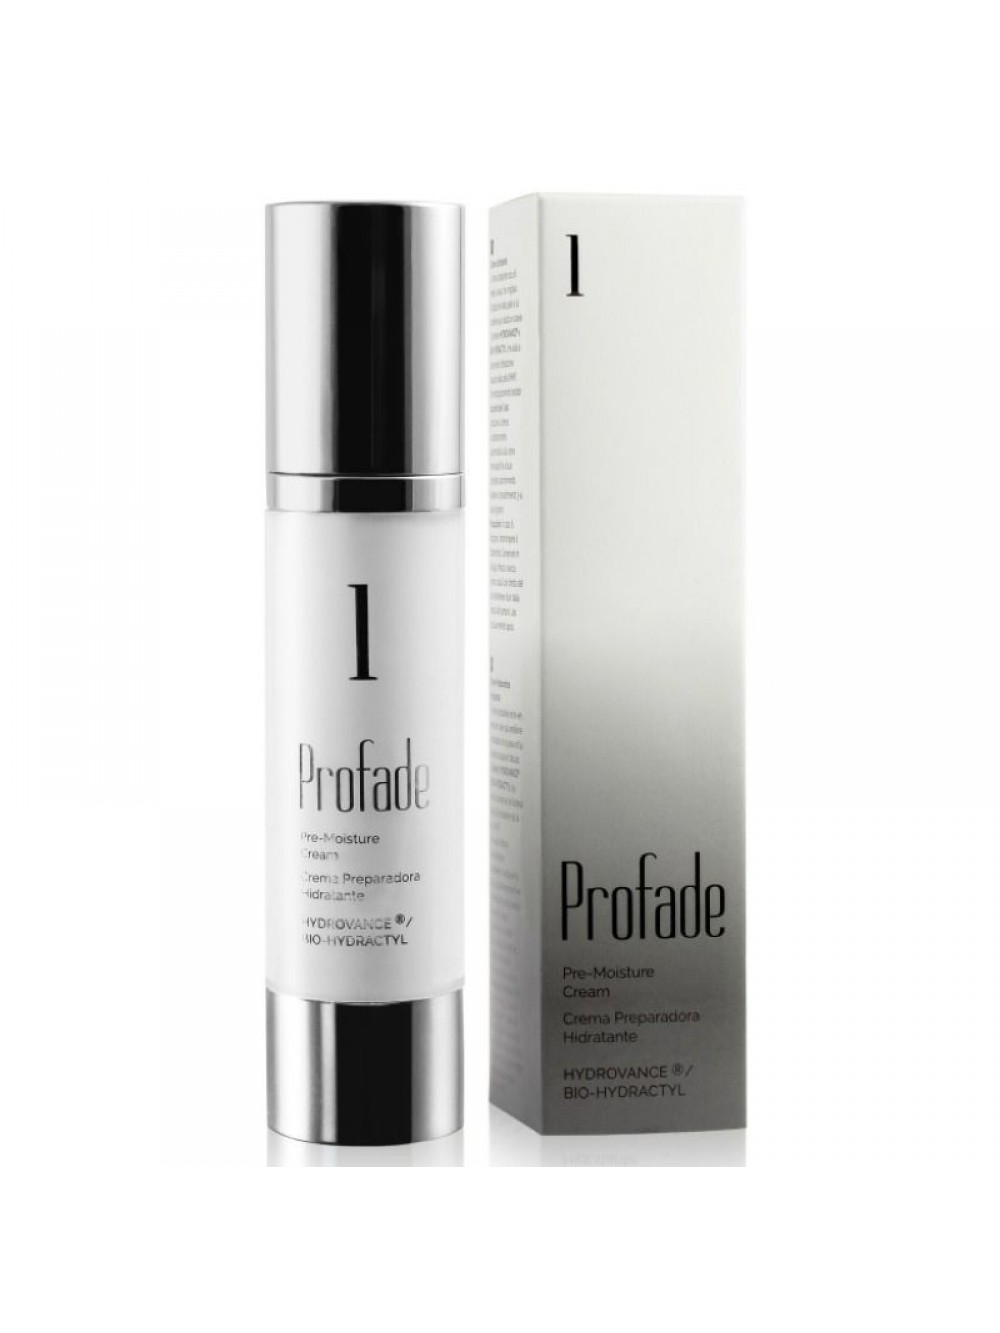 PROFADE 1 MOISTURIZER GEL FOR SCARS AND TATTOOED  SKIN